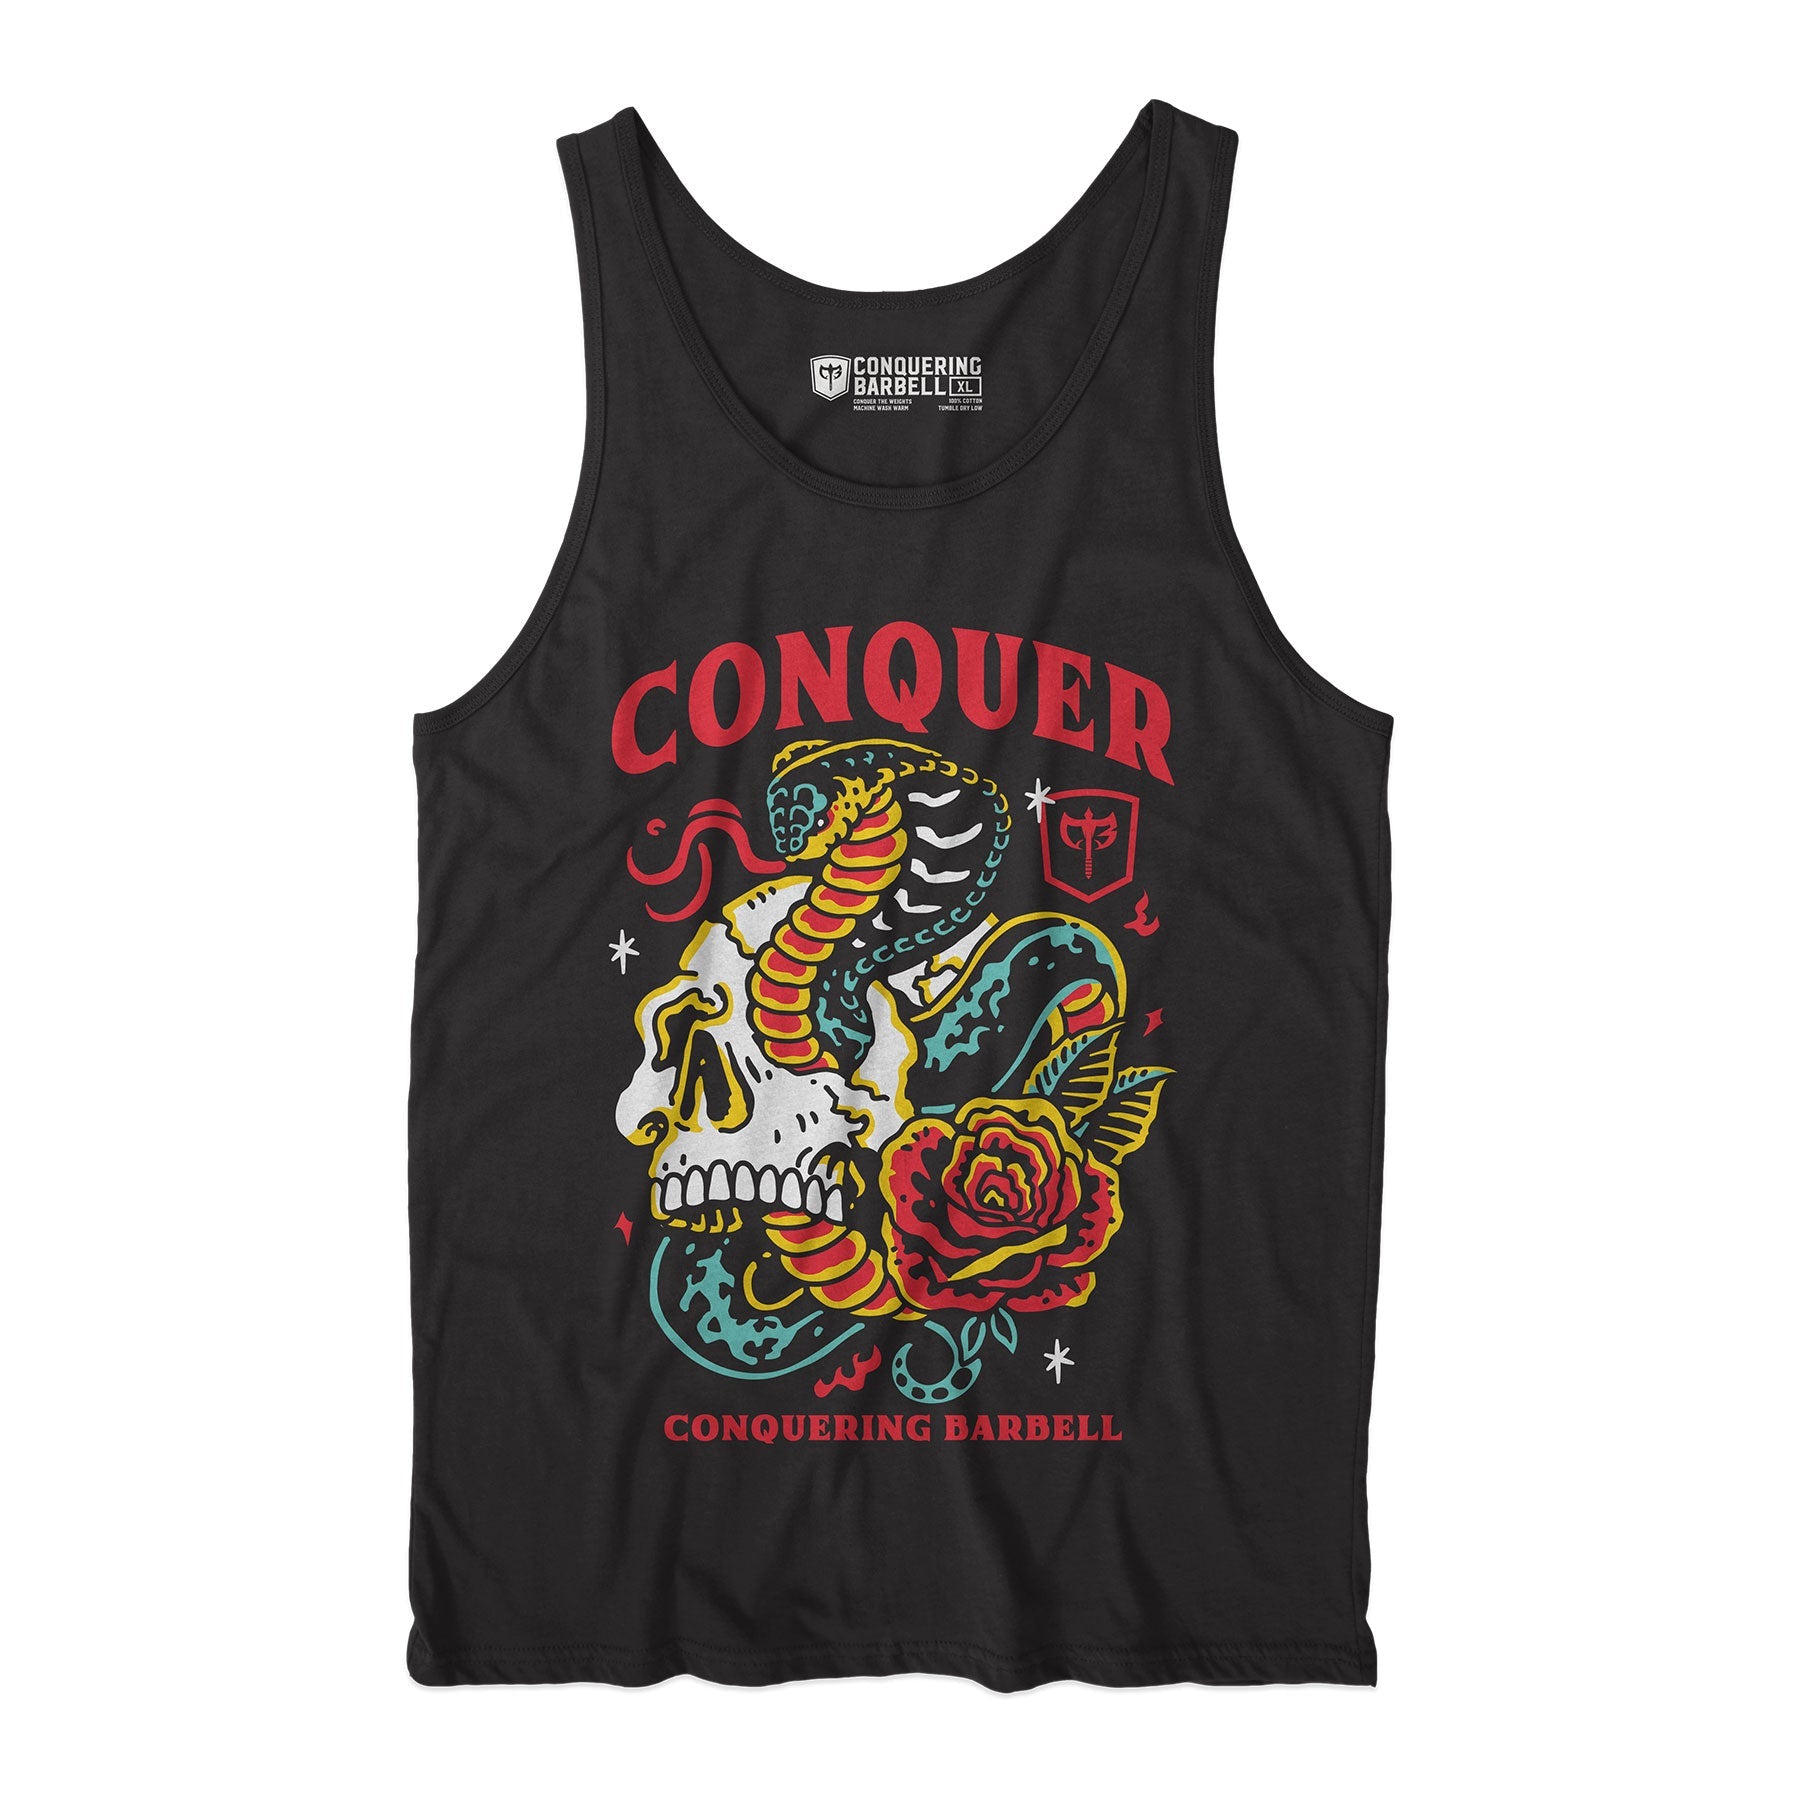 Conquer Muscle Tank - Black